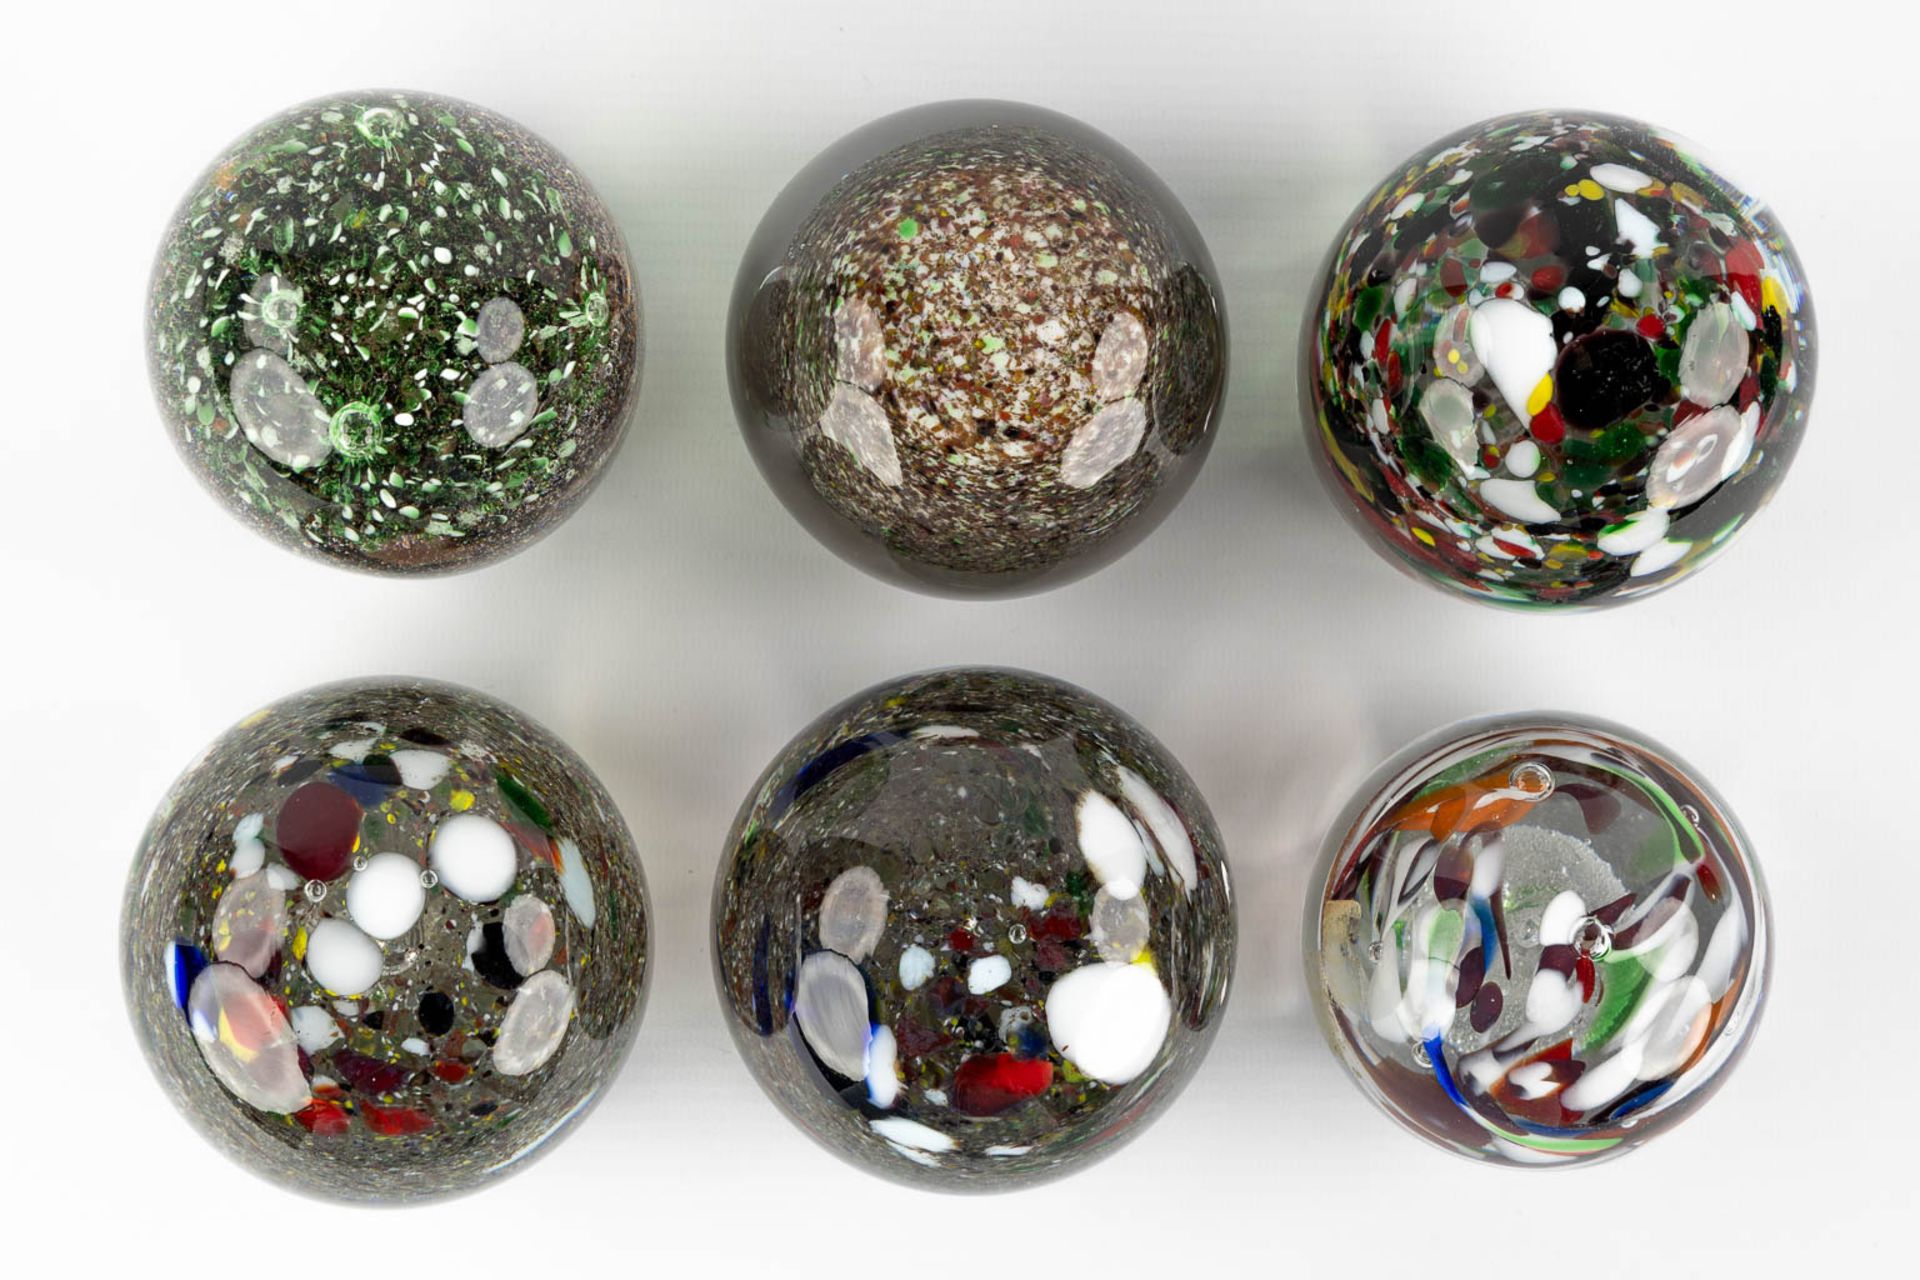 15 paperweights or Presse Papiers, probably made in Murano Italy. (H:8 x D:8 cm) - Bild 9 aus 15